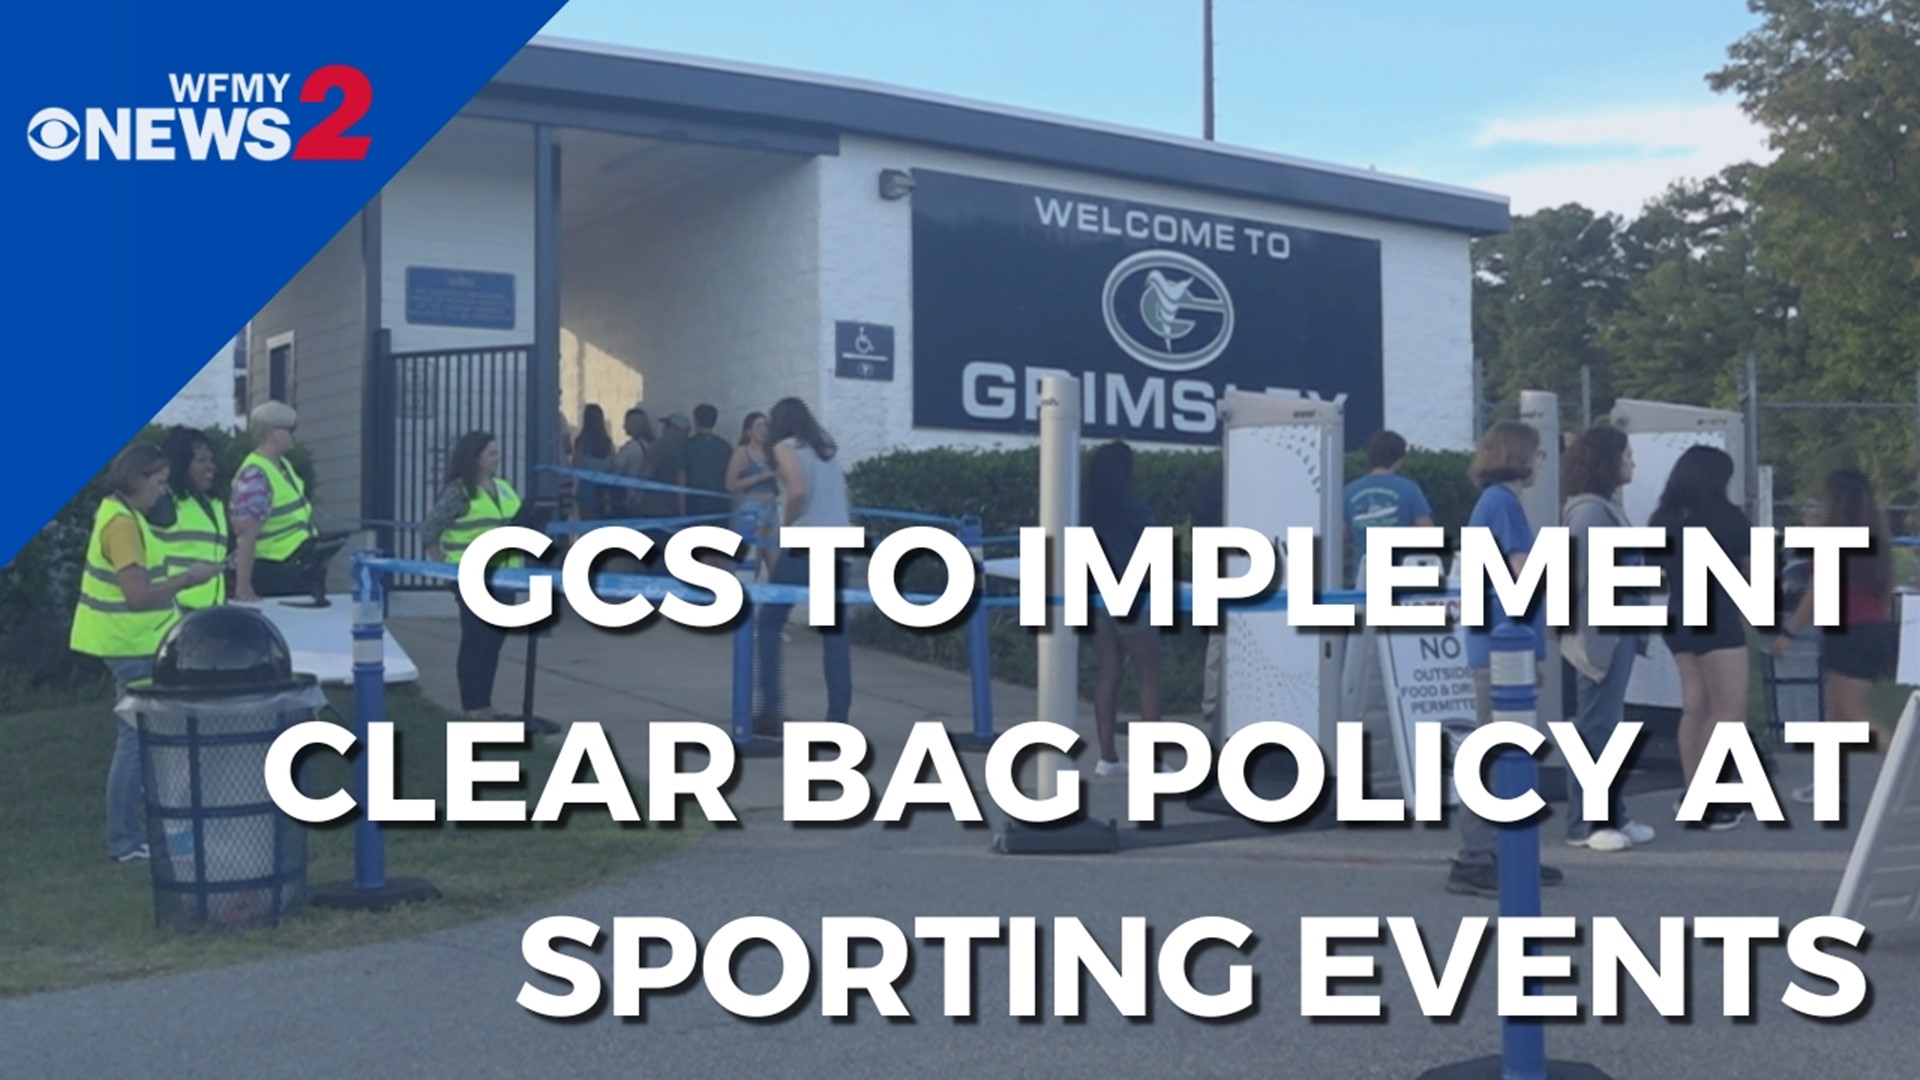 GCS officials said no traditional bags are allowed at sporting events. It’s a measure meant to keep spectators safe.